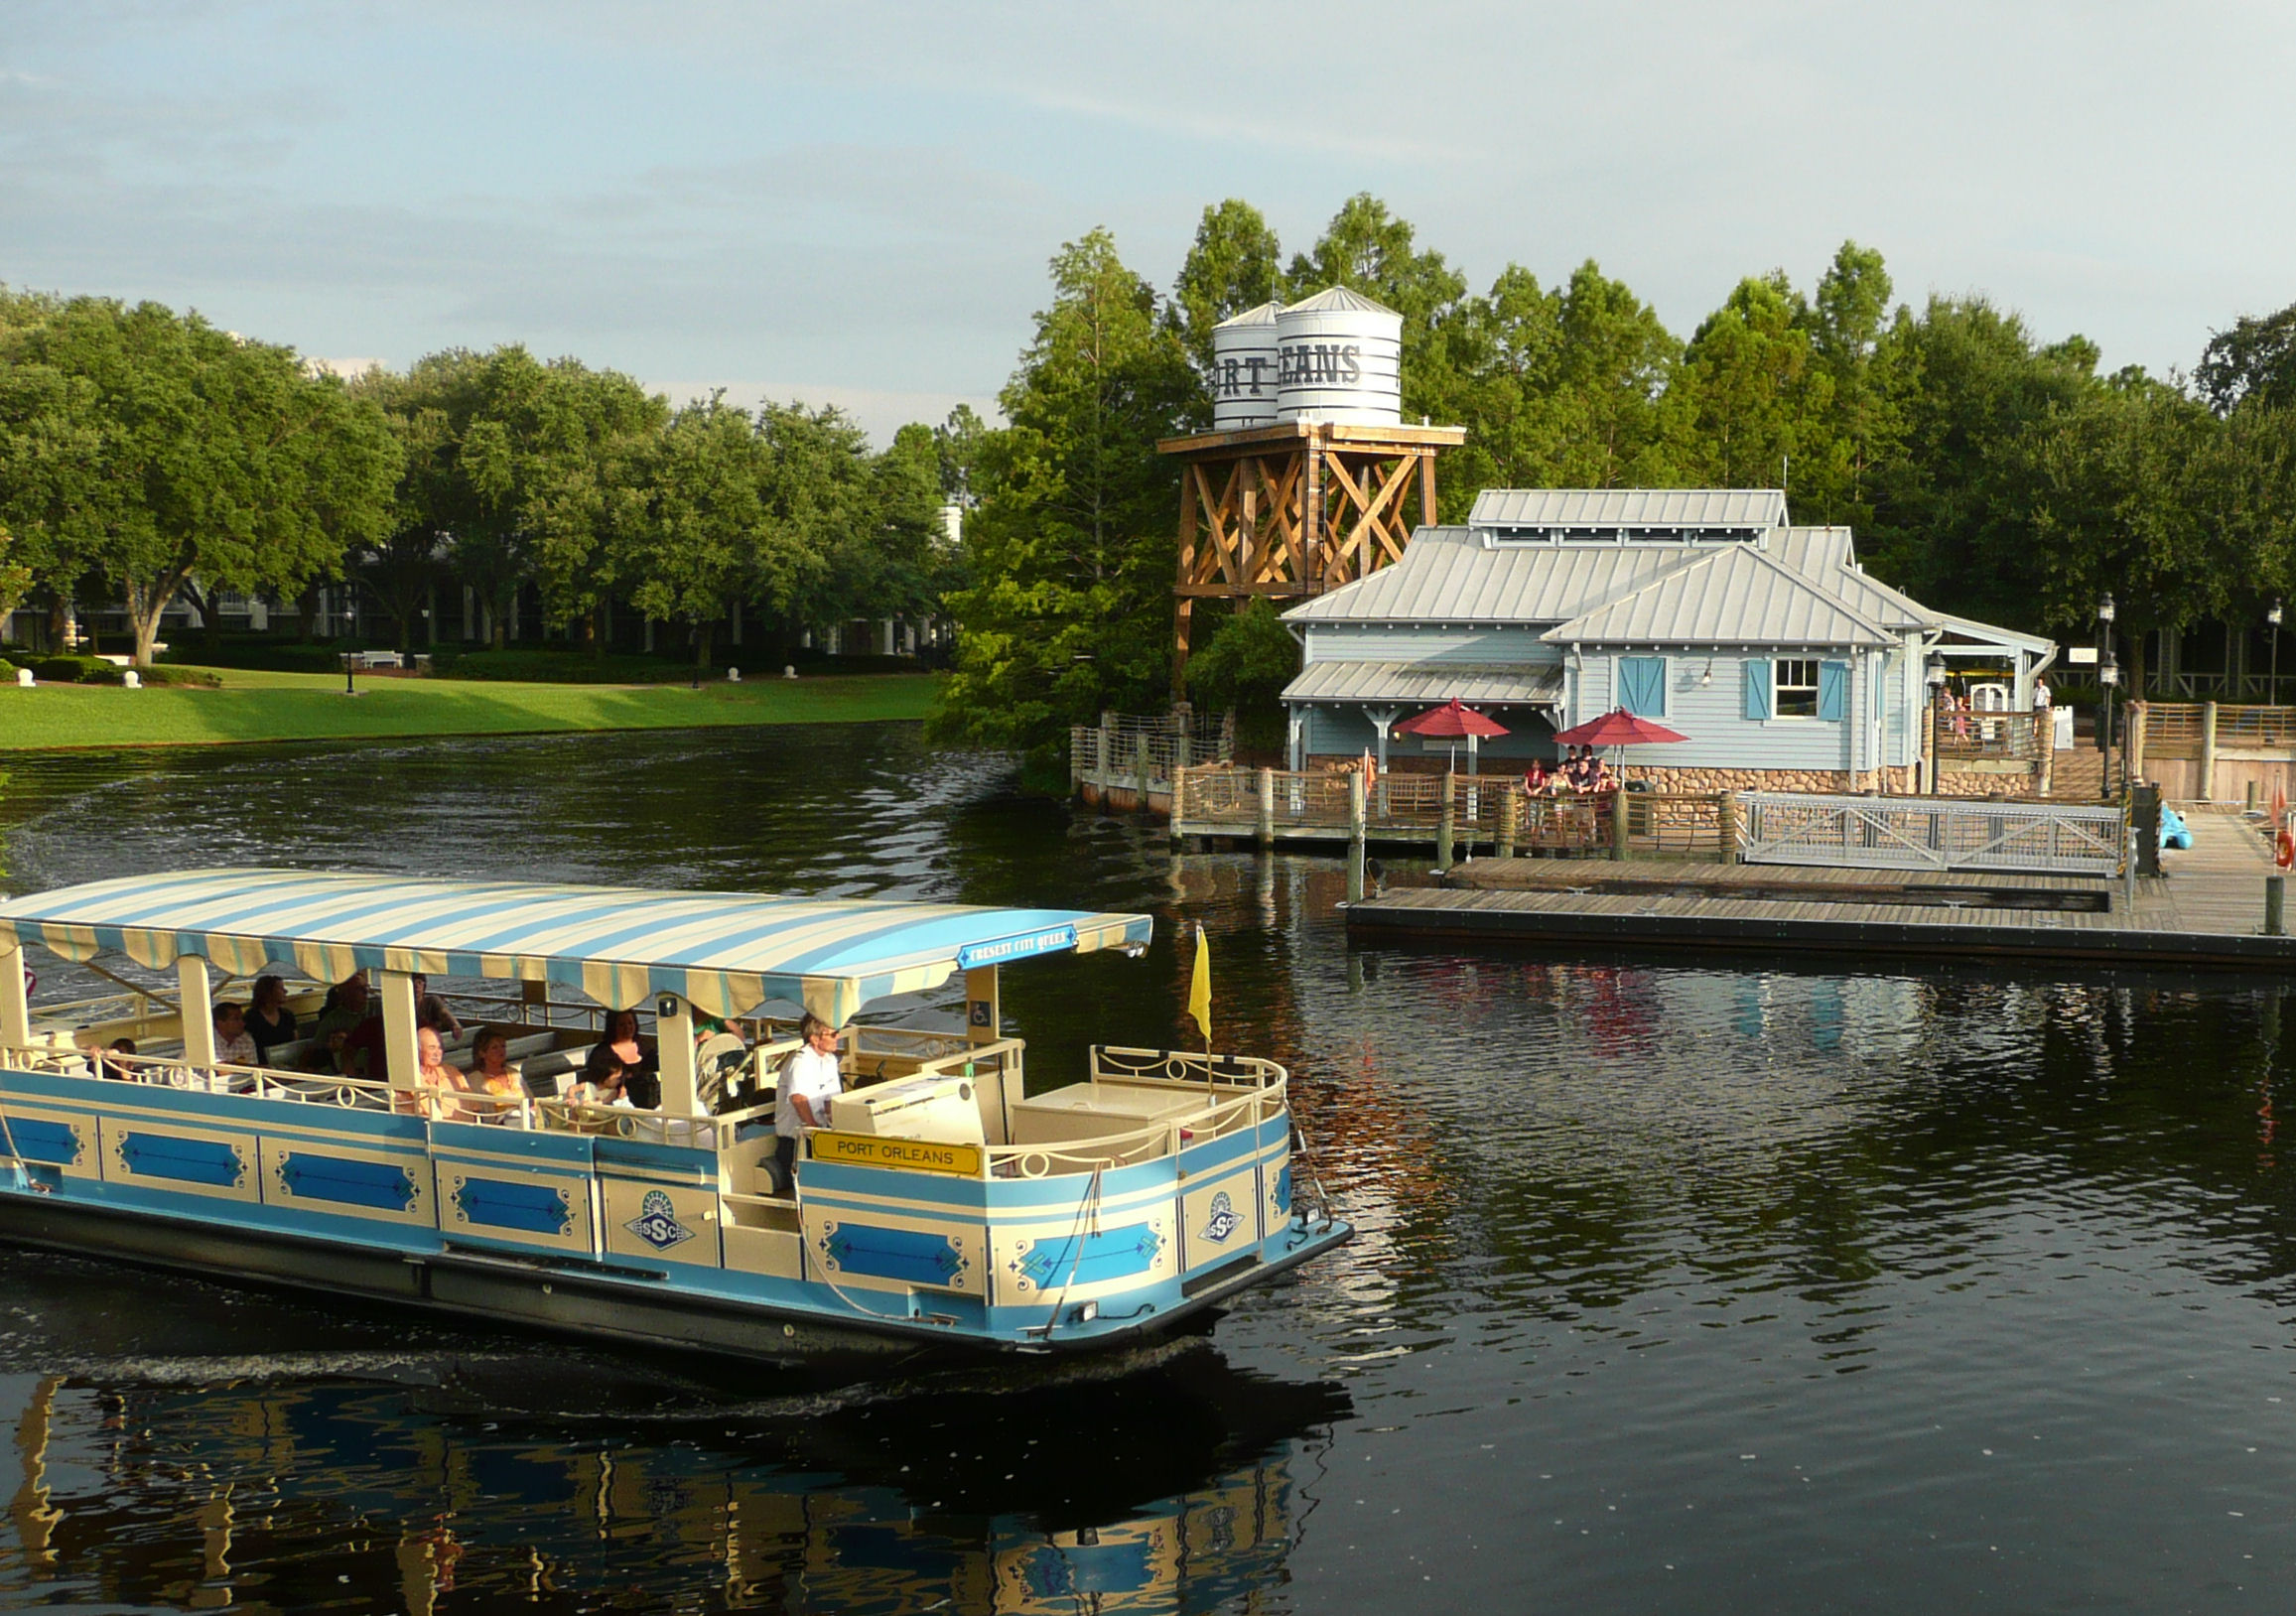 Boat ride on the Sassagoula River between Dixie Landings Resort and Downtown Disney.